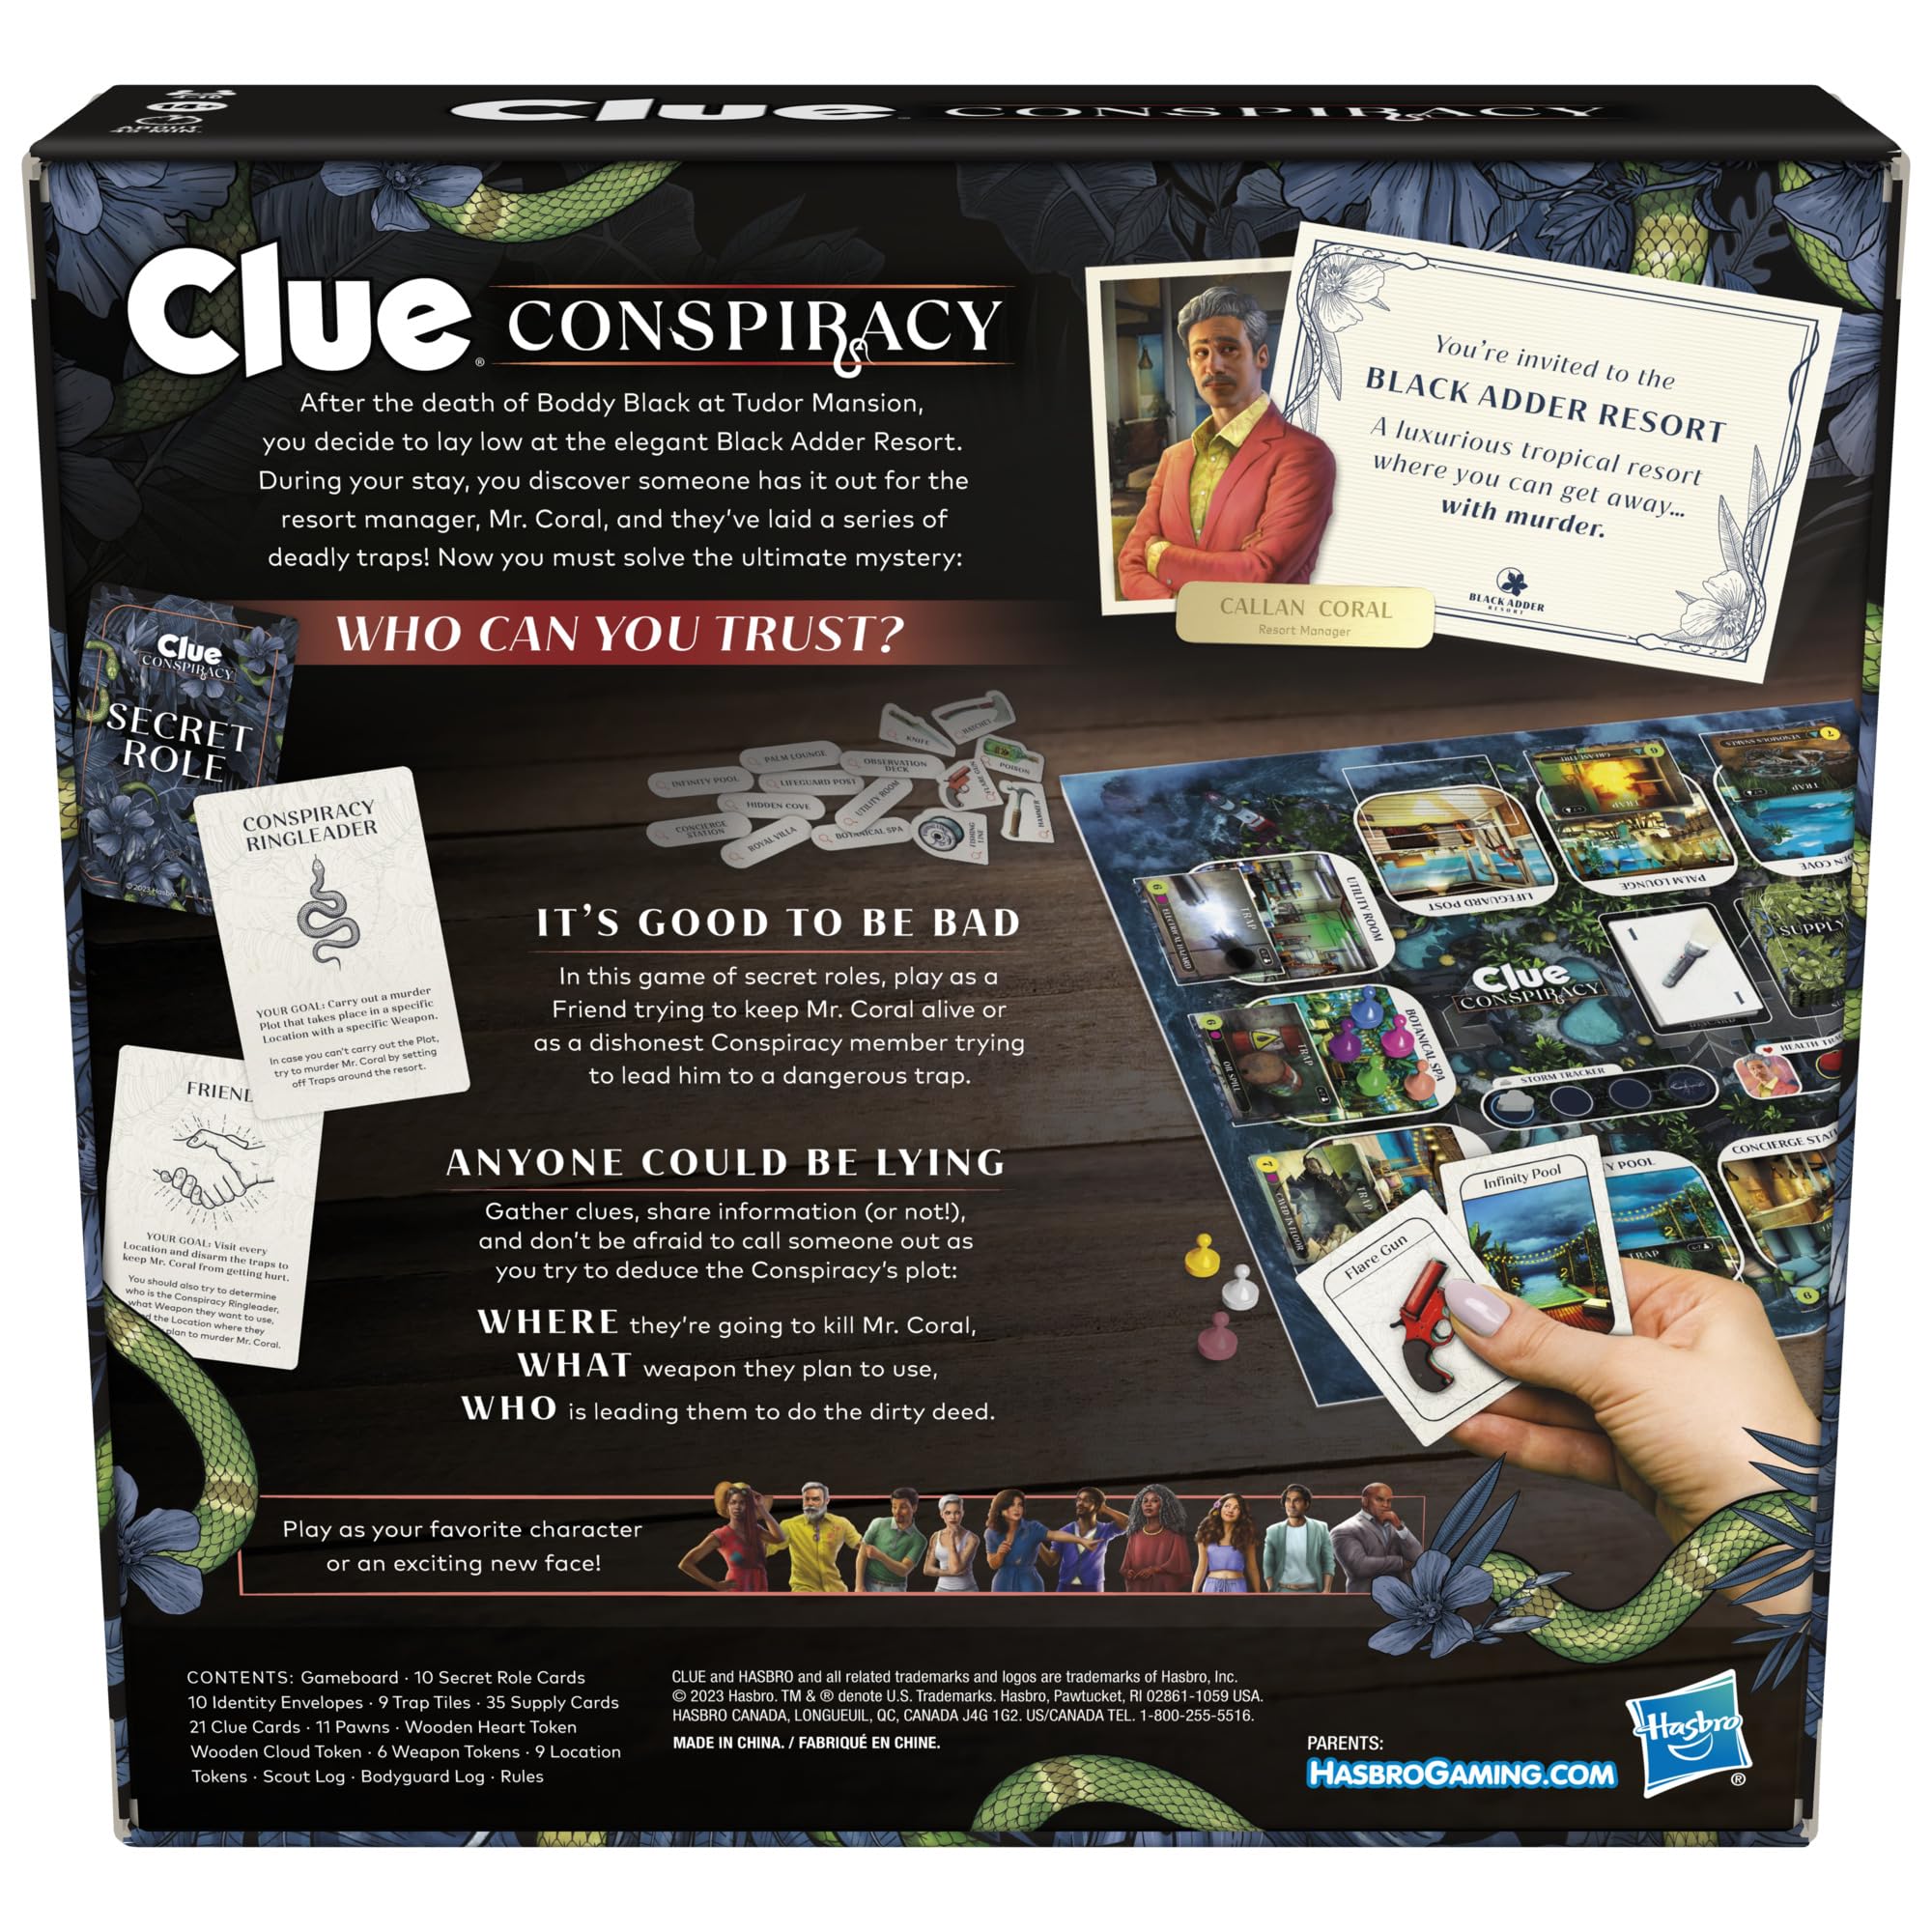 Clue Conspiracy Board Game for Adults and Teens | Secret Role Strategy Games | Ages 14+ | 4-10 Players | 45 Mins.| Mystery & Party Games